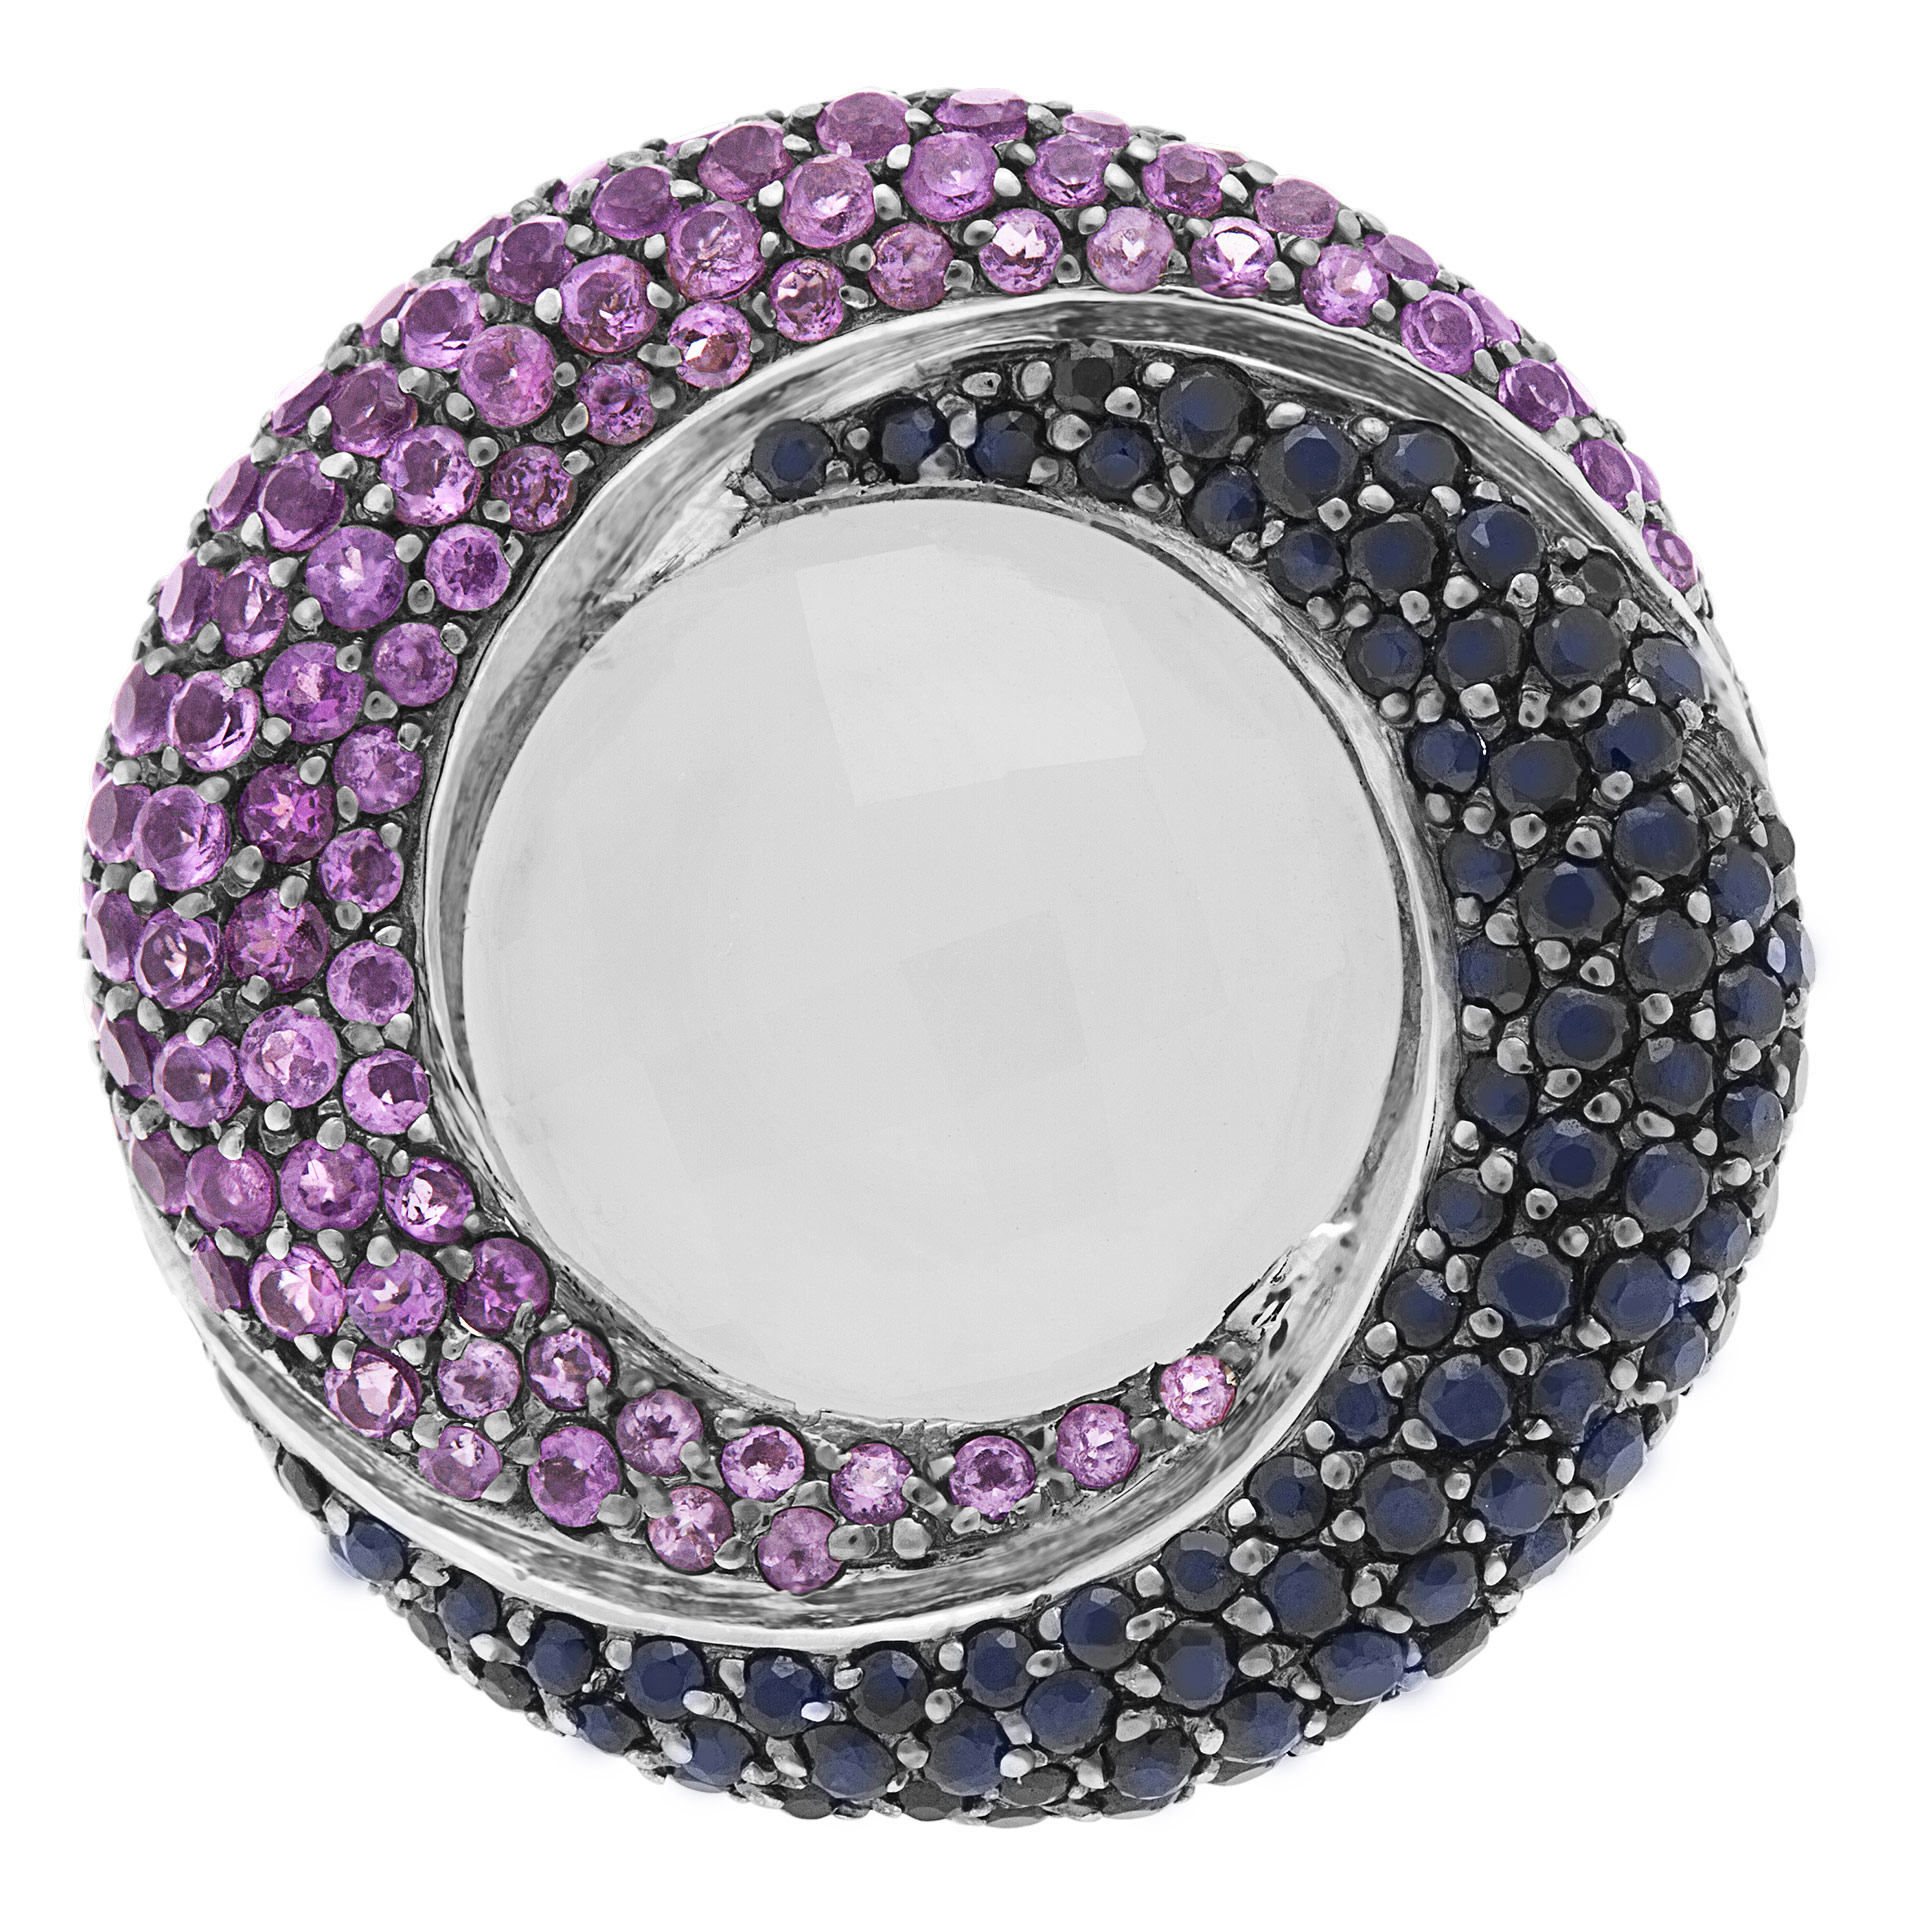 Moonstone with blue sapphires and purple amethyst ring in 18k white gold